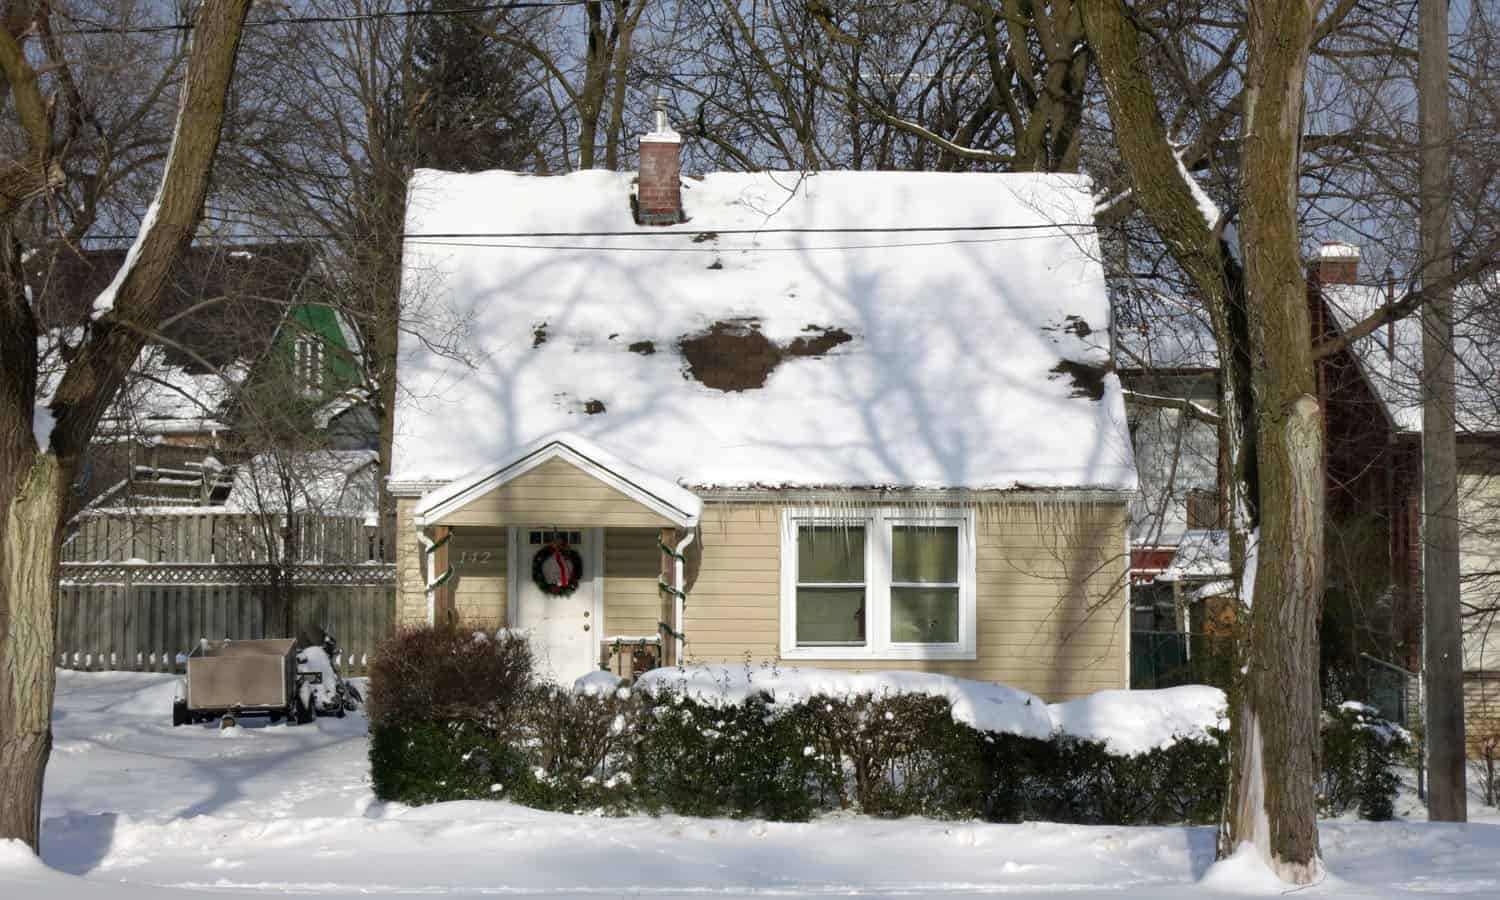 This typical house on Spadina Road East is characterized by its compact, rational plan, its modest size, its steep gabled roof, and its small porch